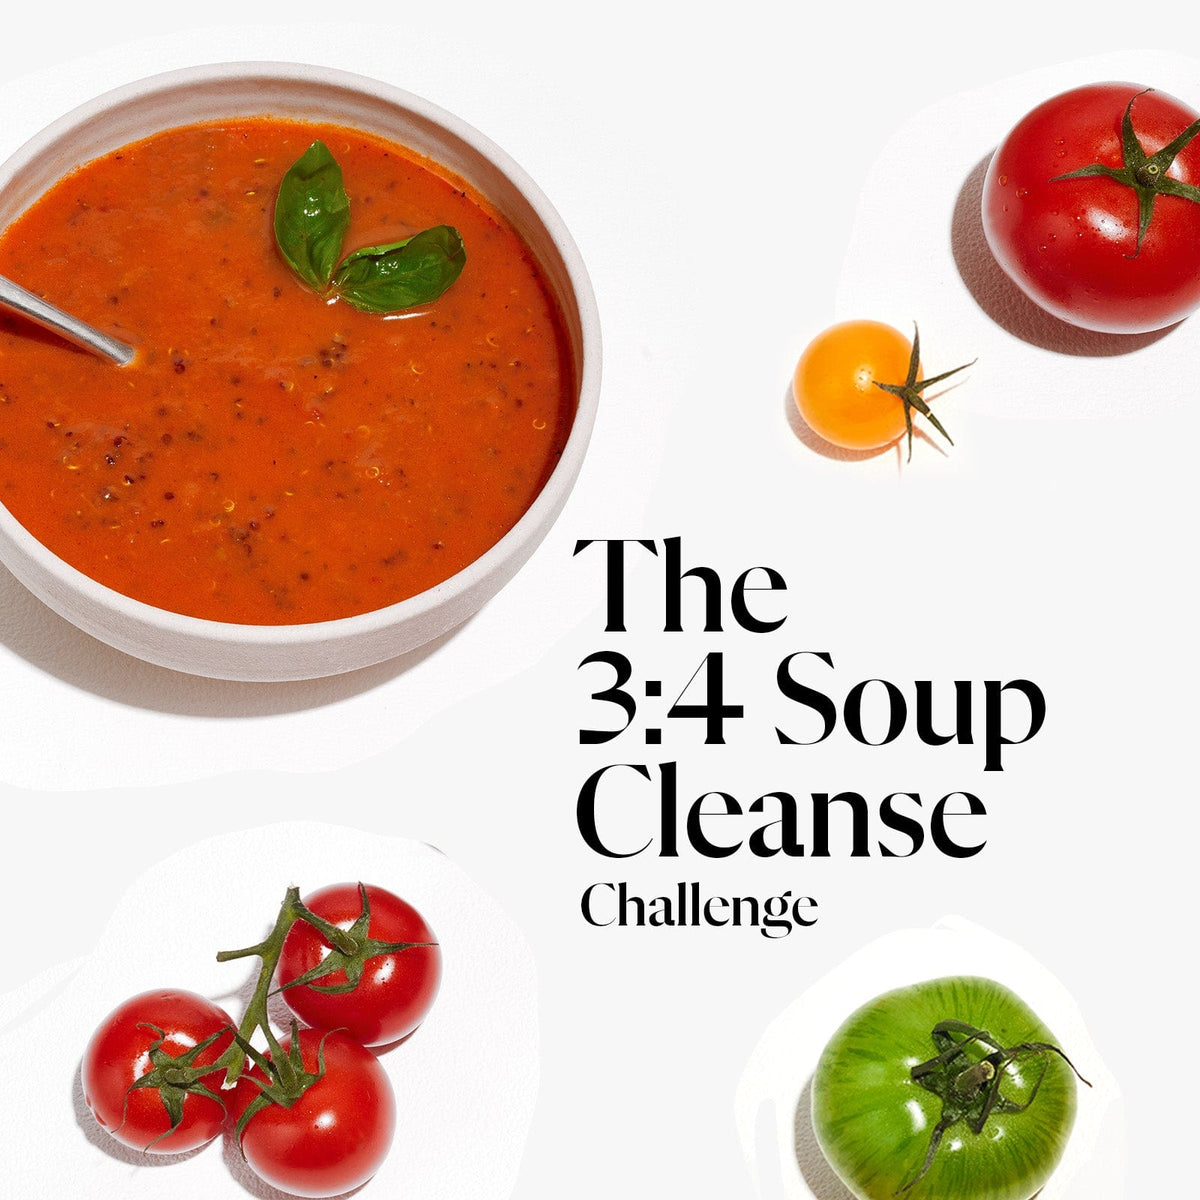 The 3:4 Soup Cleanse Challenge